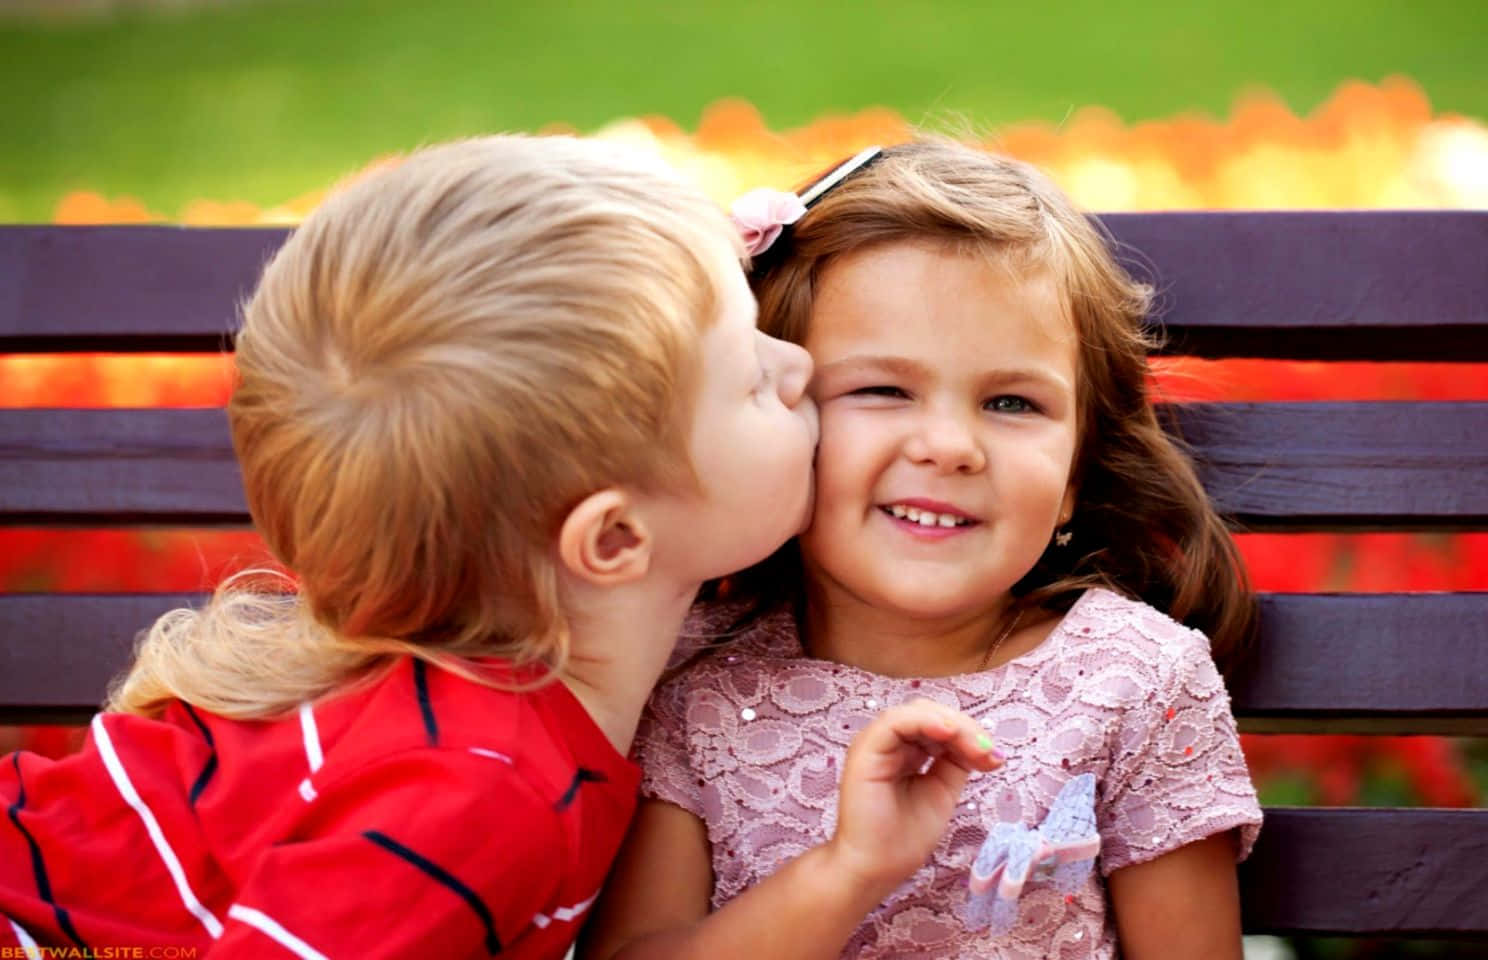 Cute Baby Couple Kiss At The Park Wallpaper